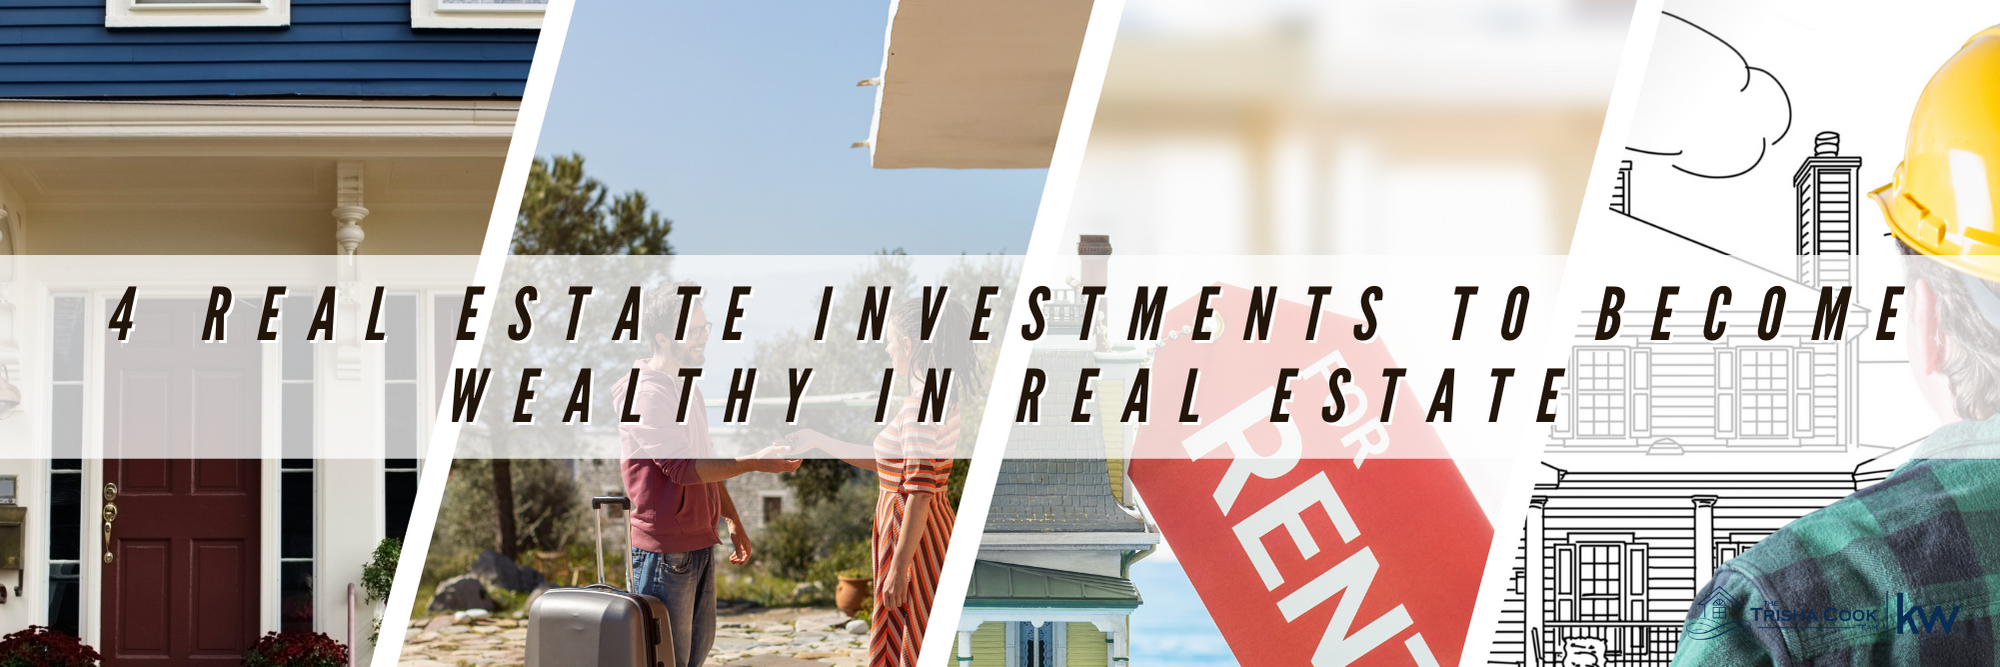 4 Real estate investments to become wealthy in real estate.png